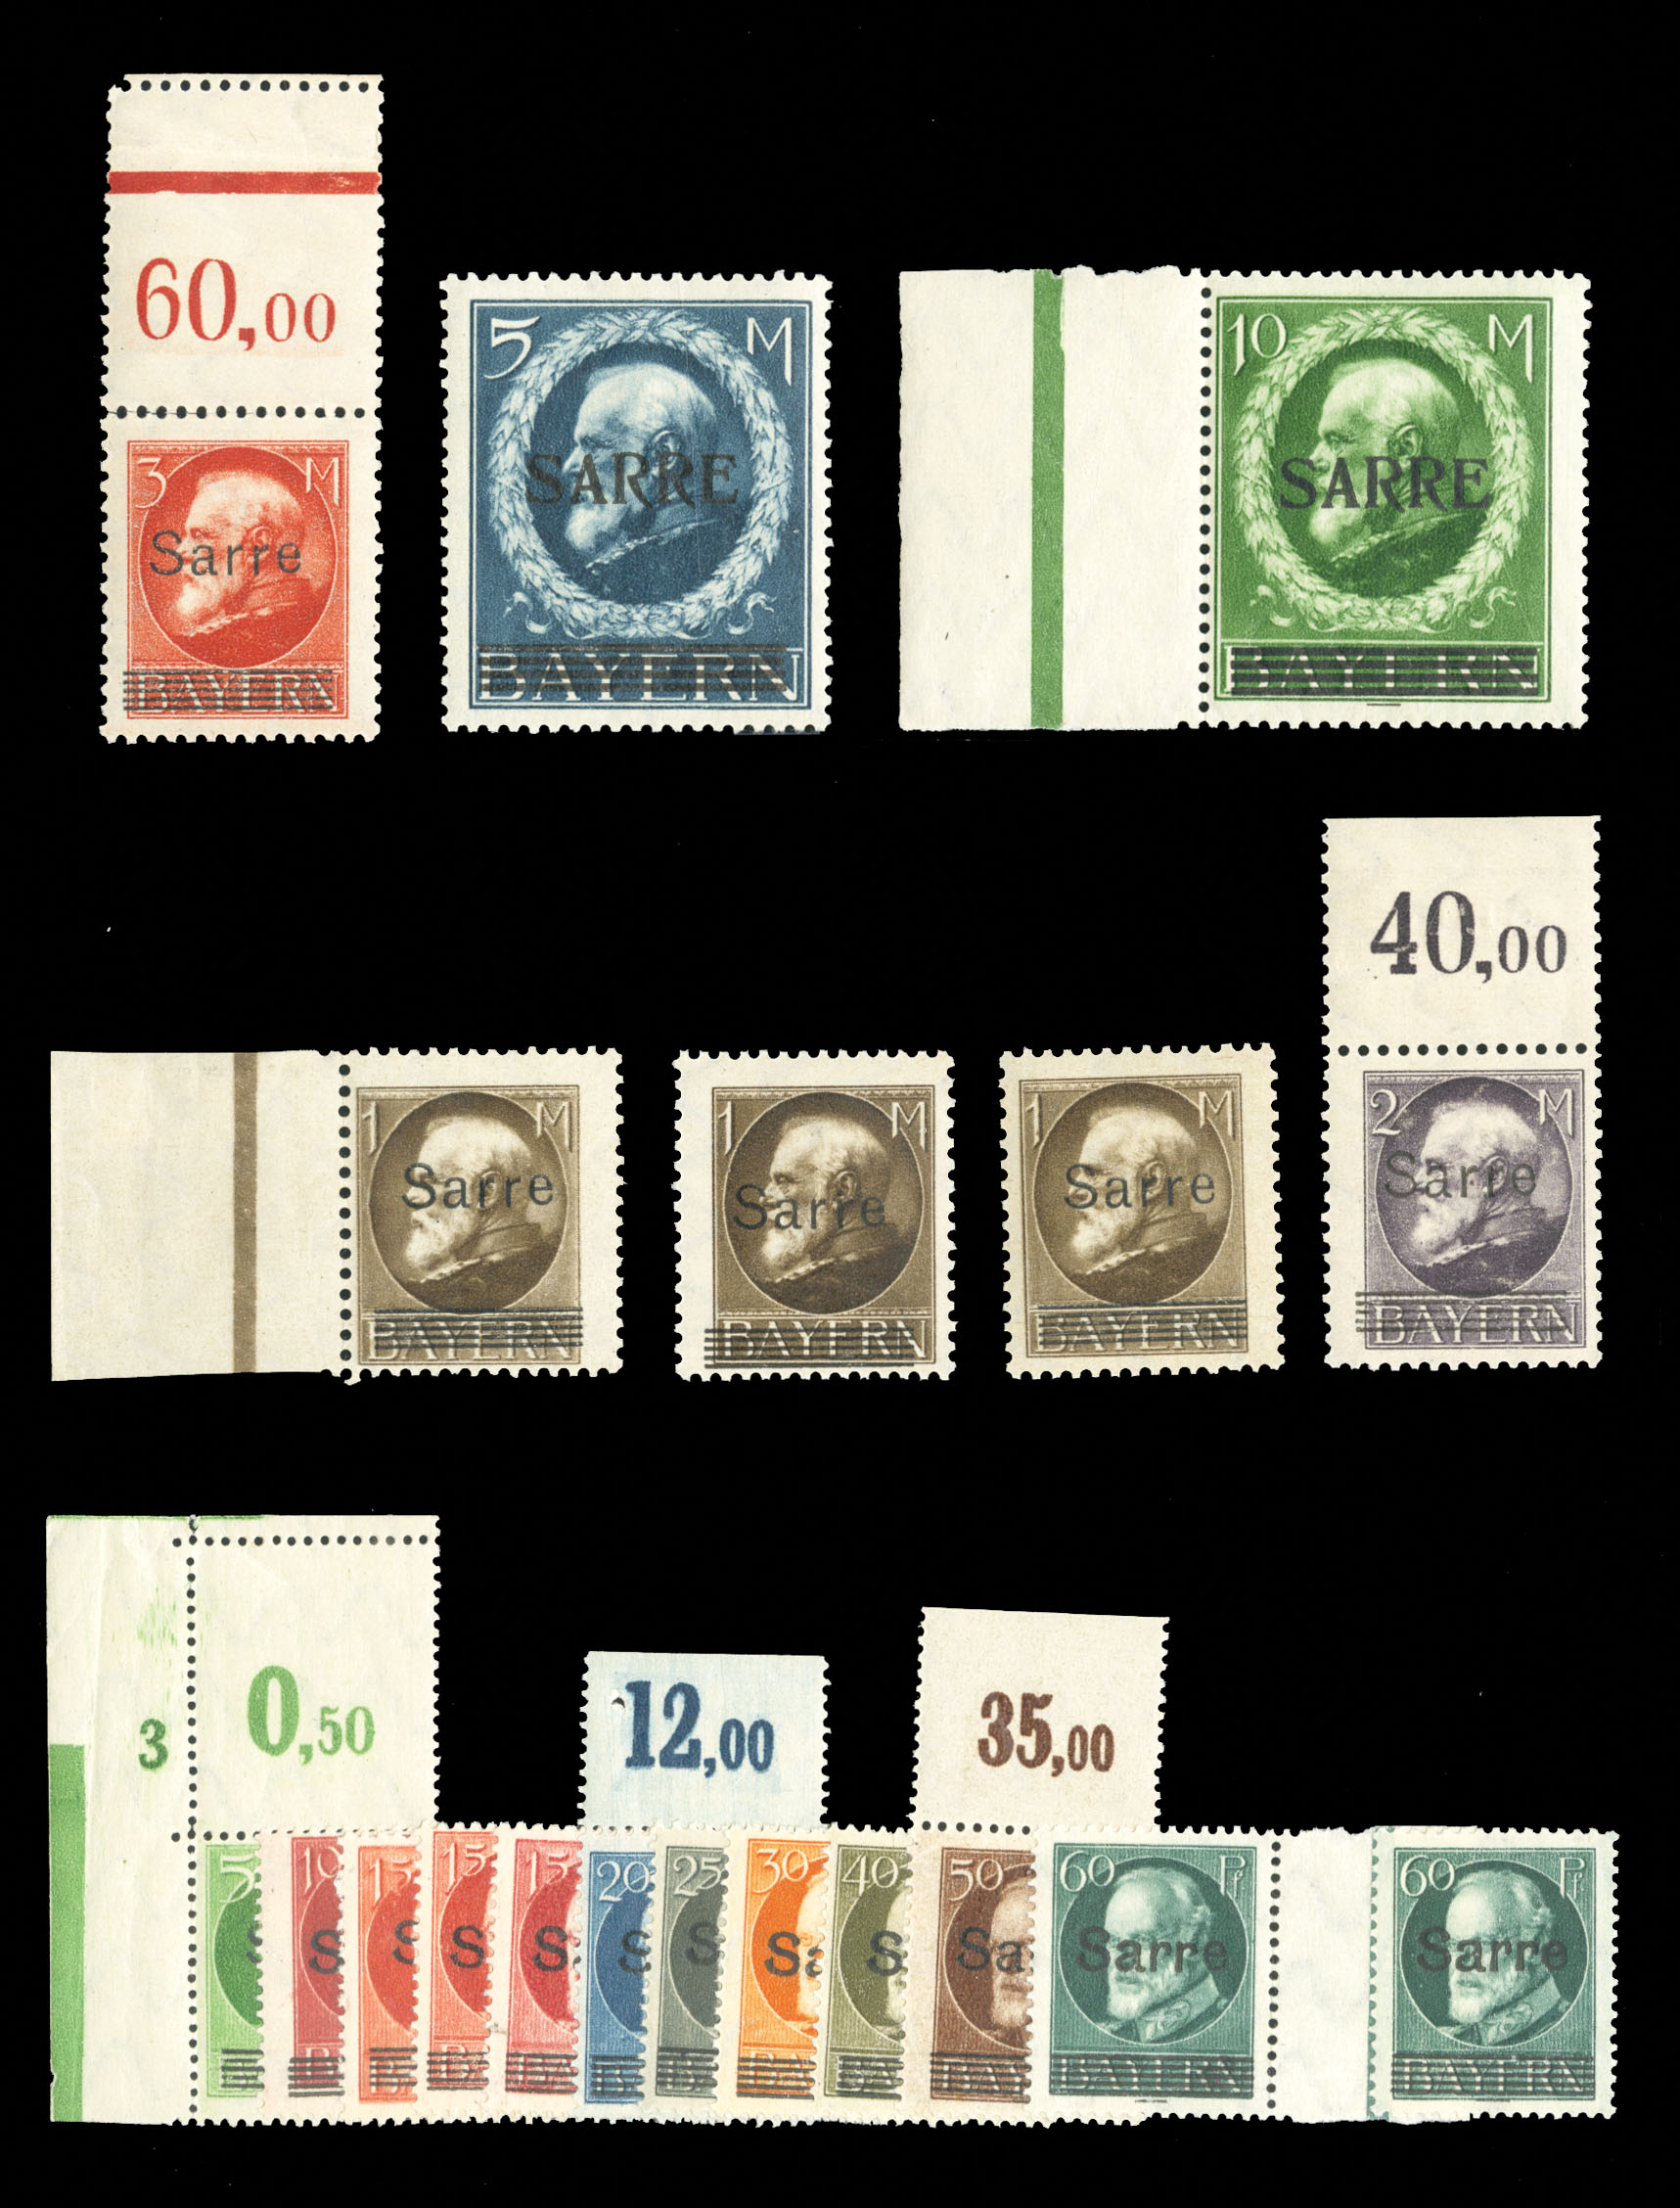 Lot 1260 - RUSSIA Russian Offices in China  -  Cherrystone Auctions U.S. & Worldwide Stamps & Postal History